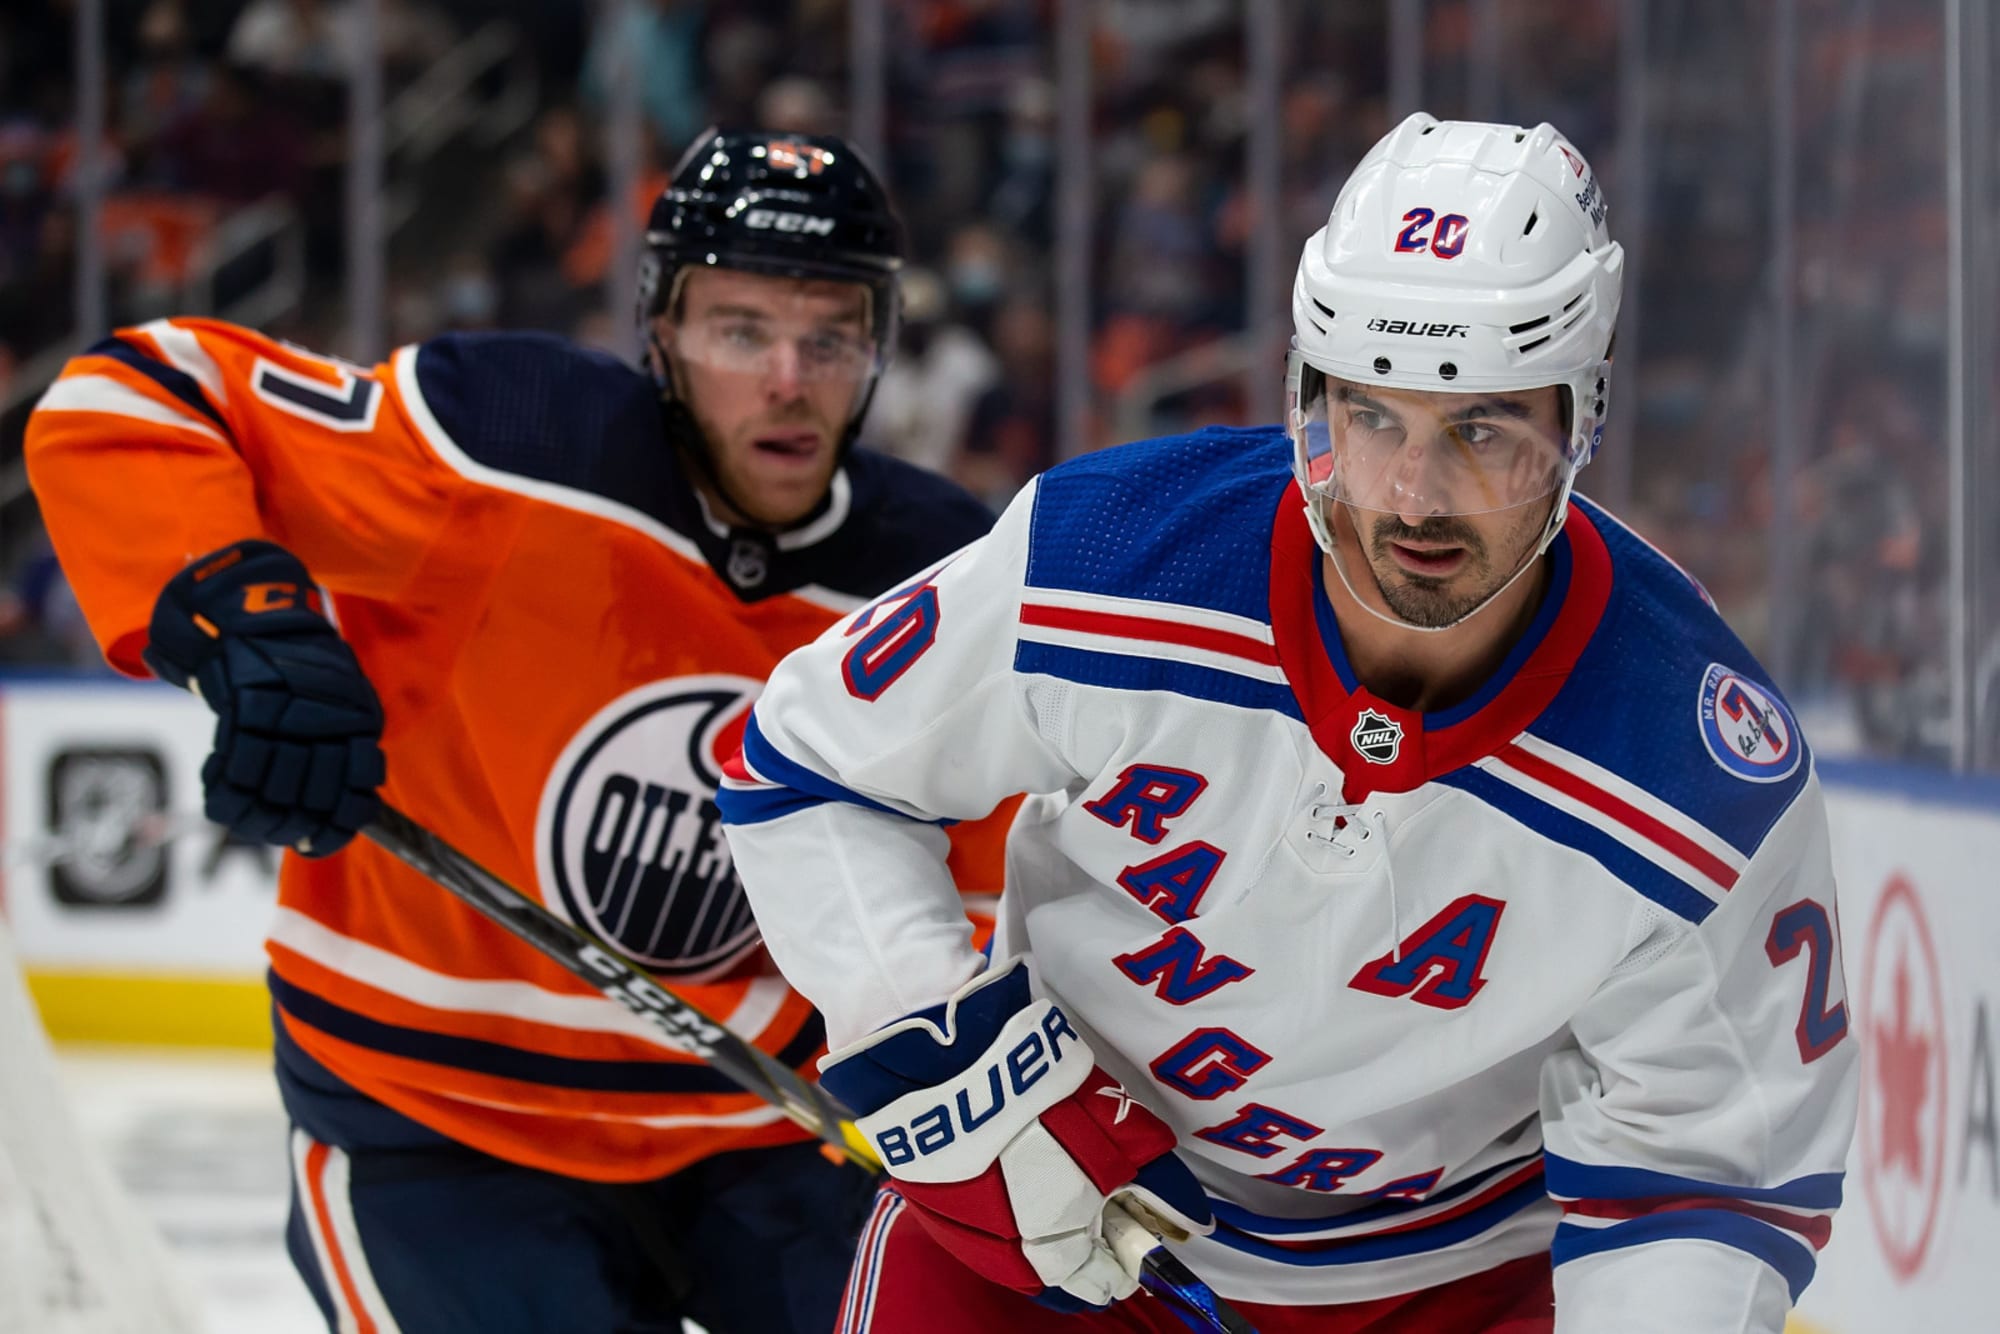 Oilers Vs Rangers Date, Time, Streaming, Betting Odds, More